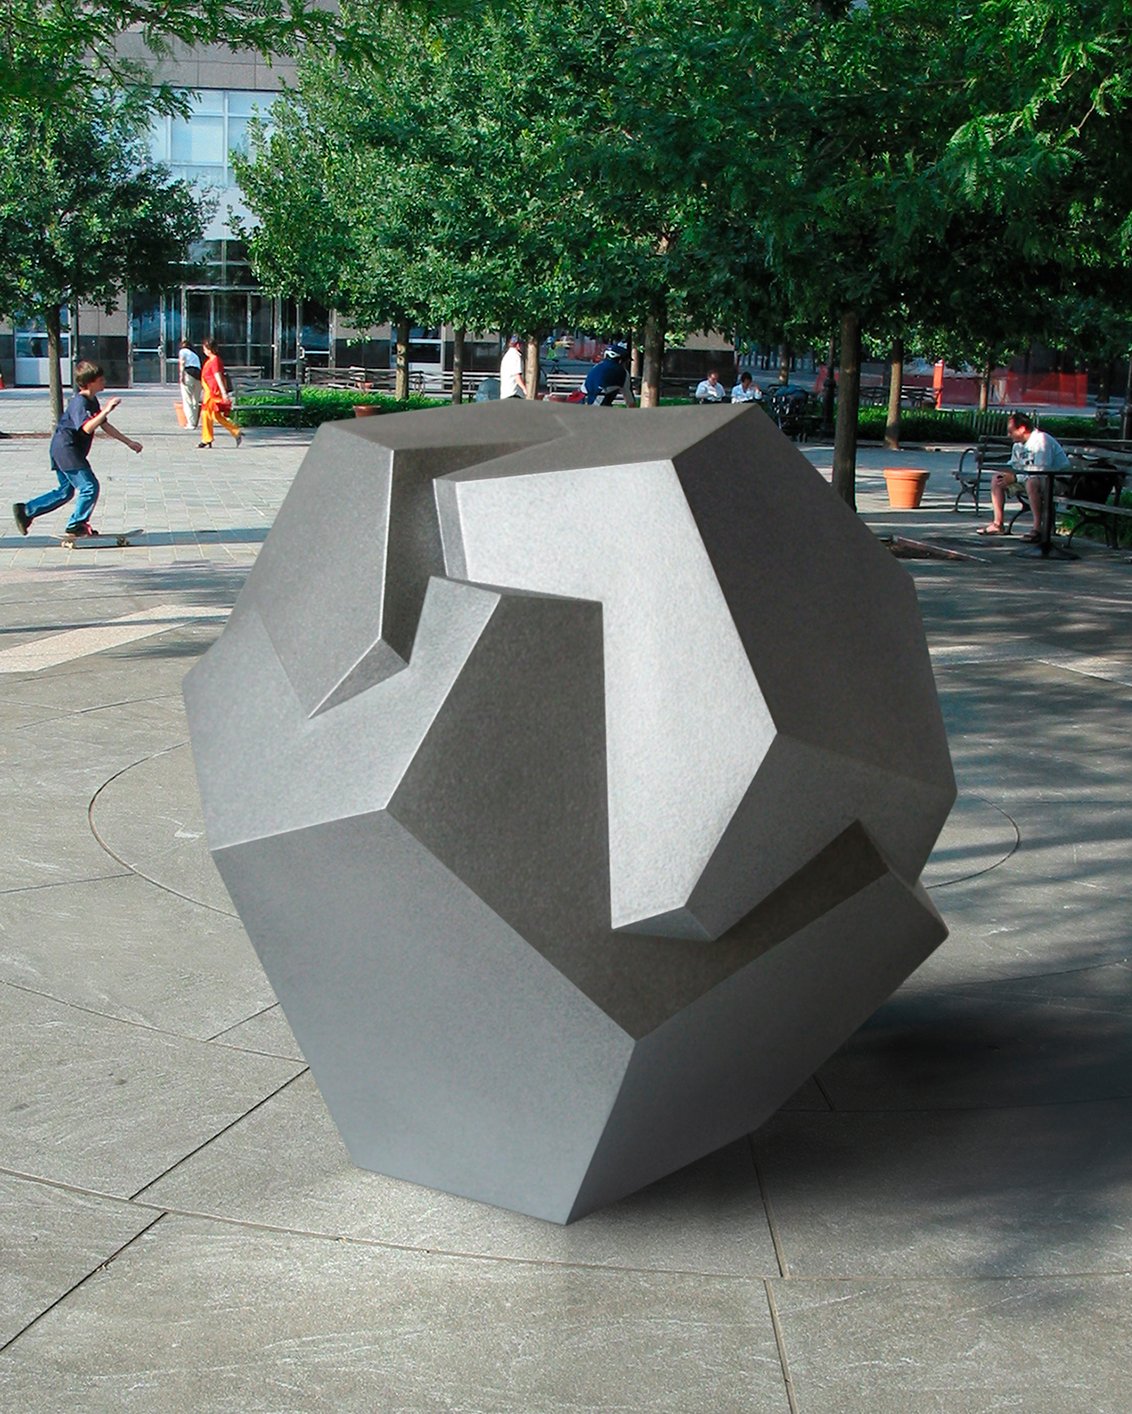 ID3 (Three Intersecting Dodecahedrons)